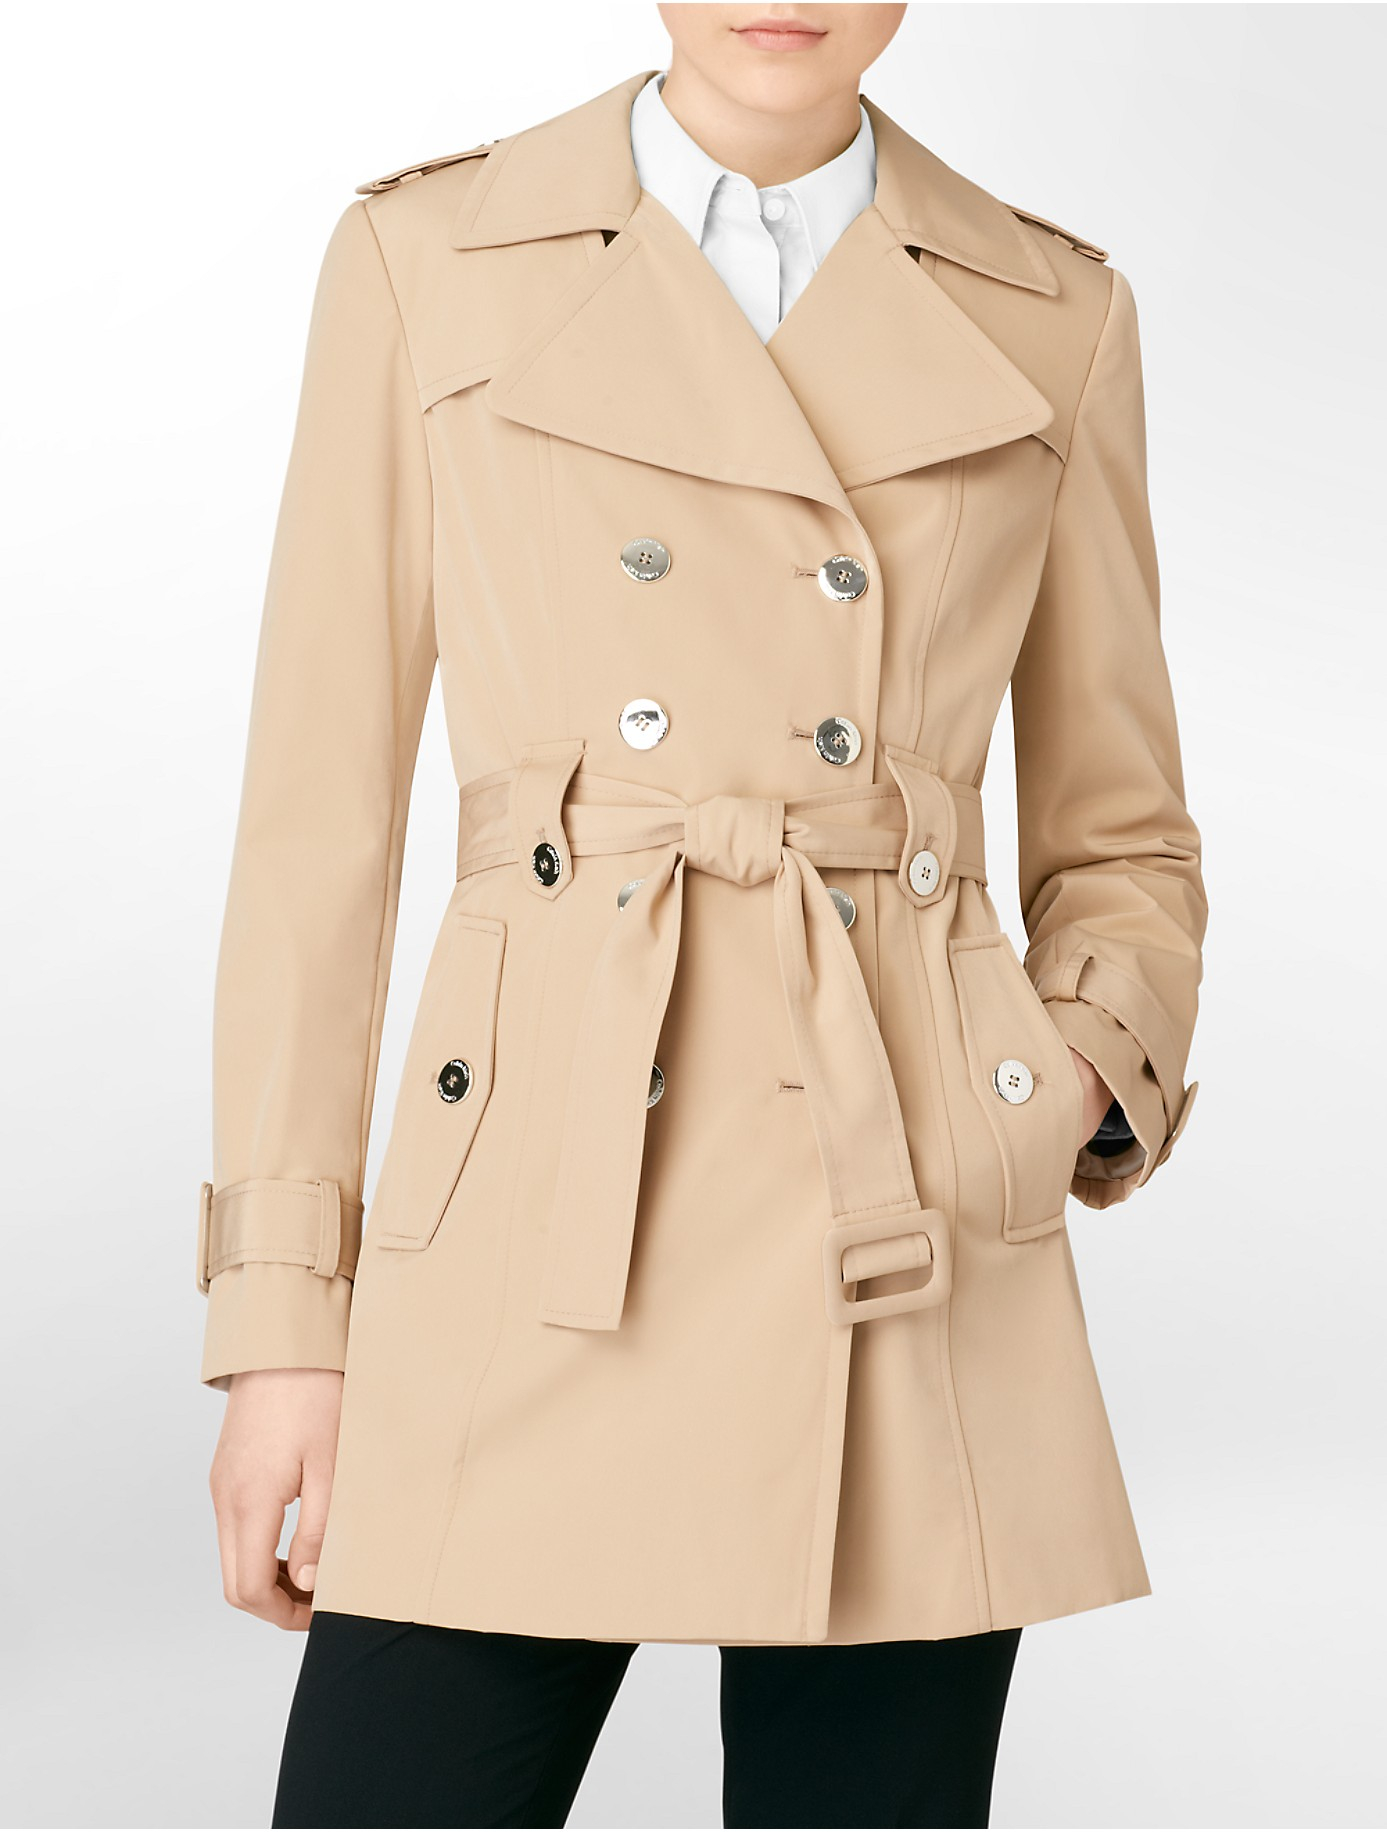 Calvin Klein White Label Belted Trench Coat in Khaki (Natural) | Lyst